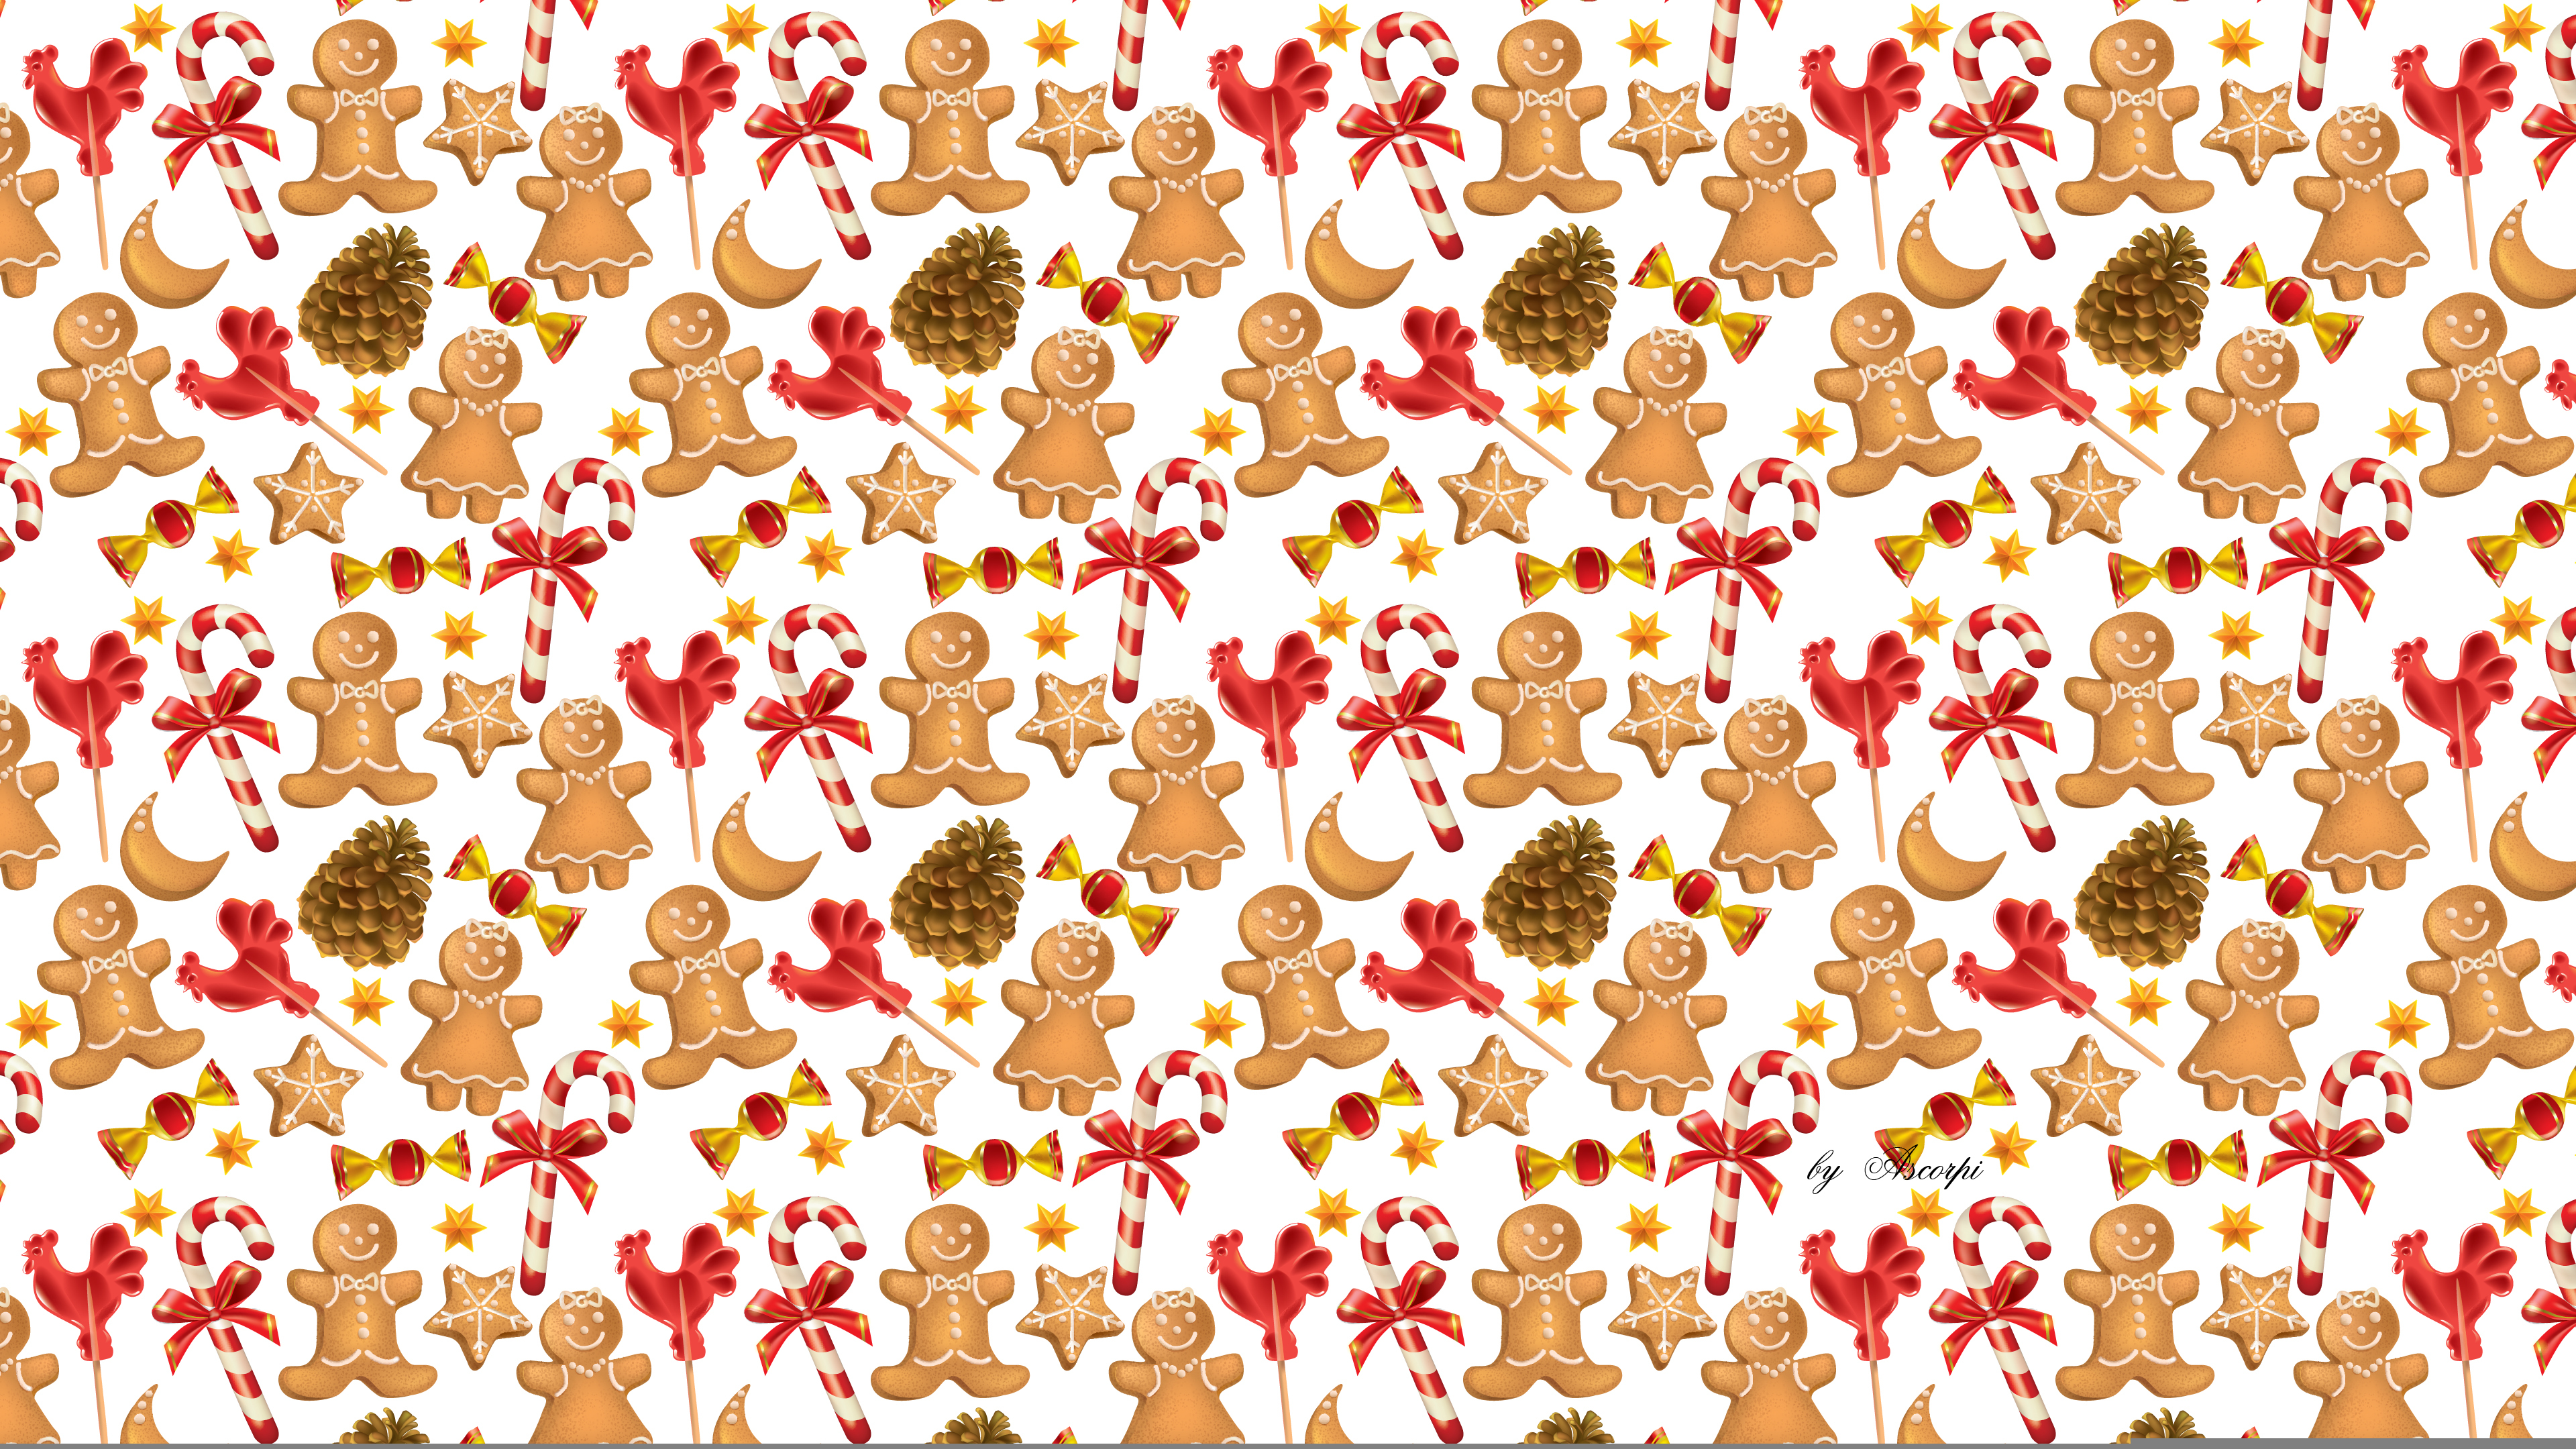 Year The Gingerbread Man Candy Cane Wallpaper Photos Pictures